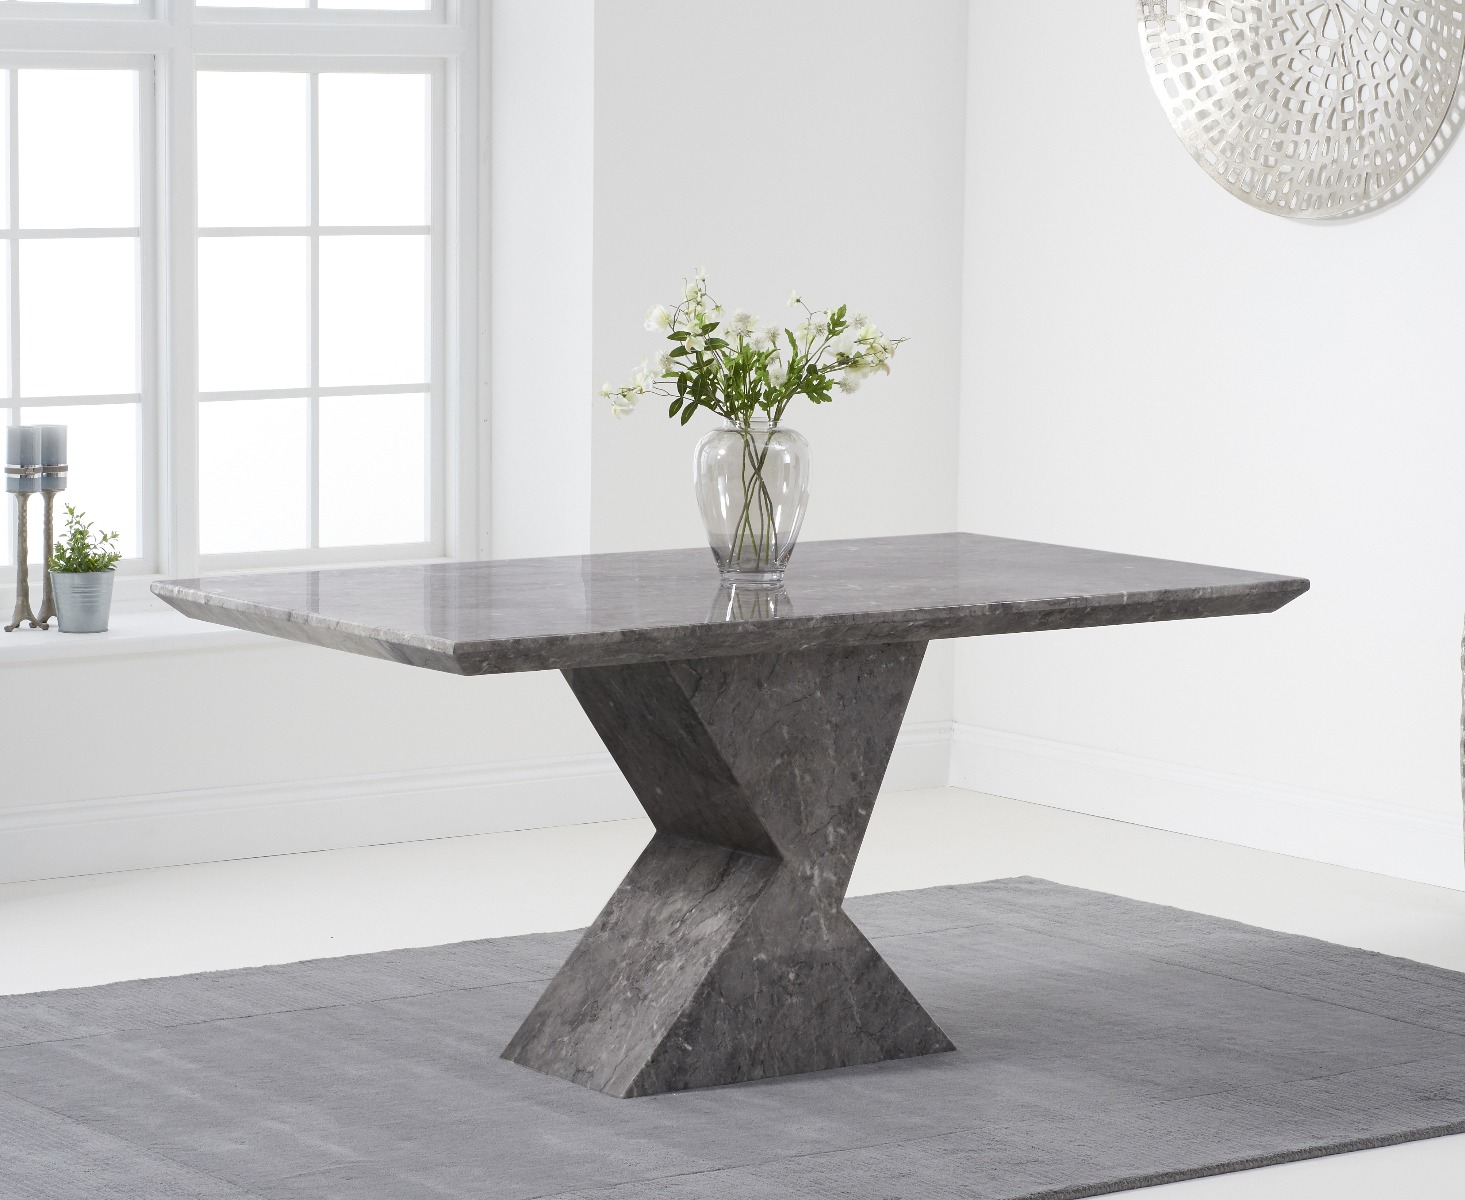 Photo 2 of Aaron 160cm grey marble dining table with 6 black aldo chairs